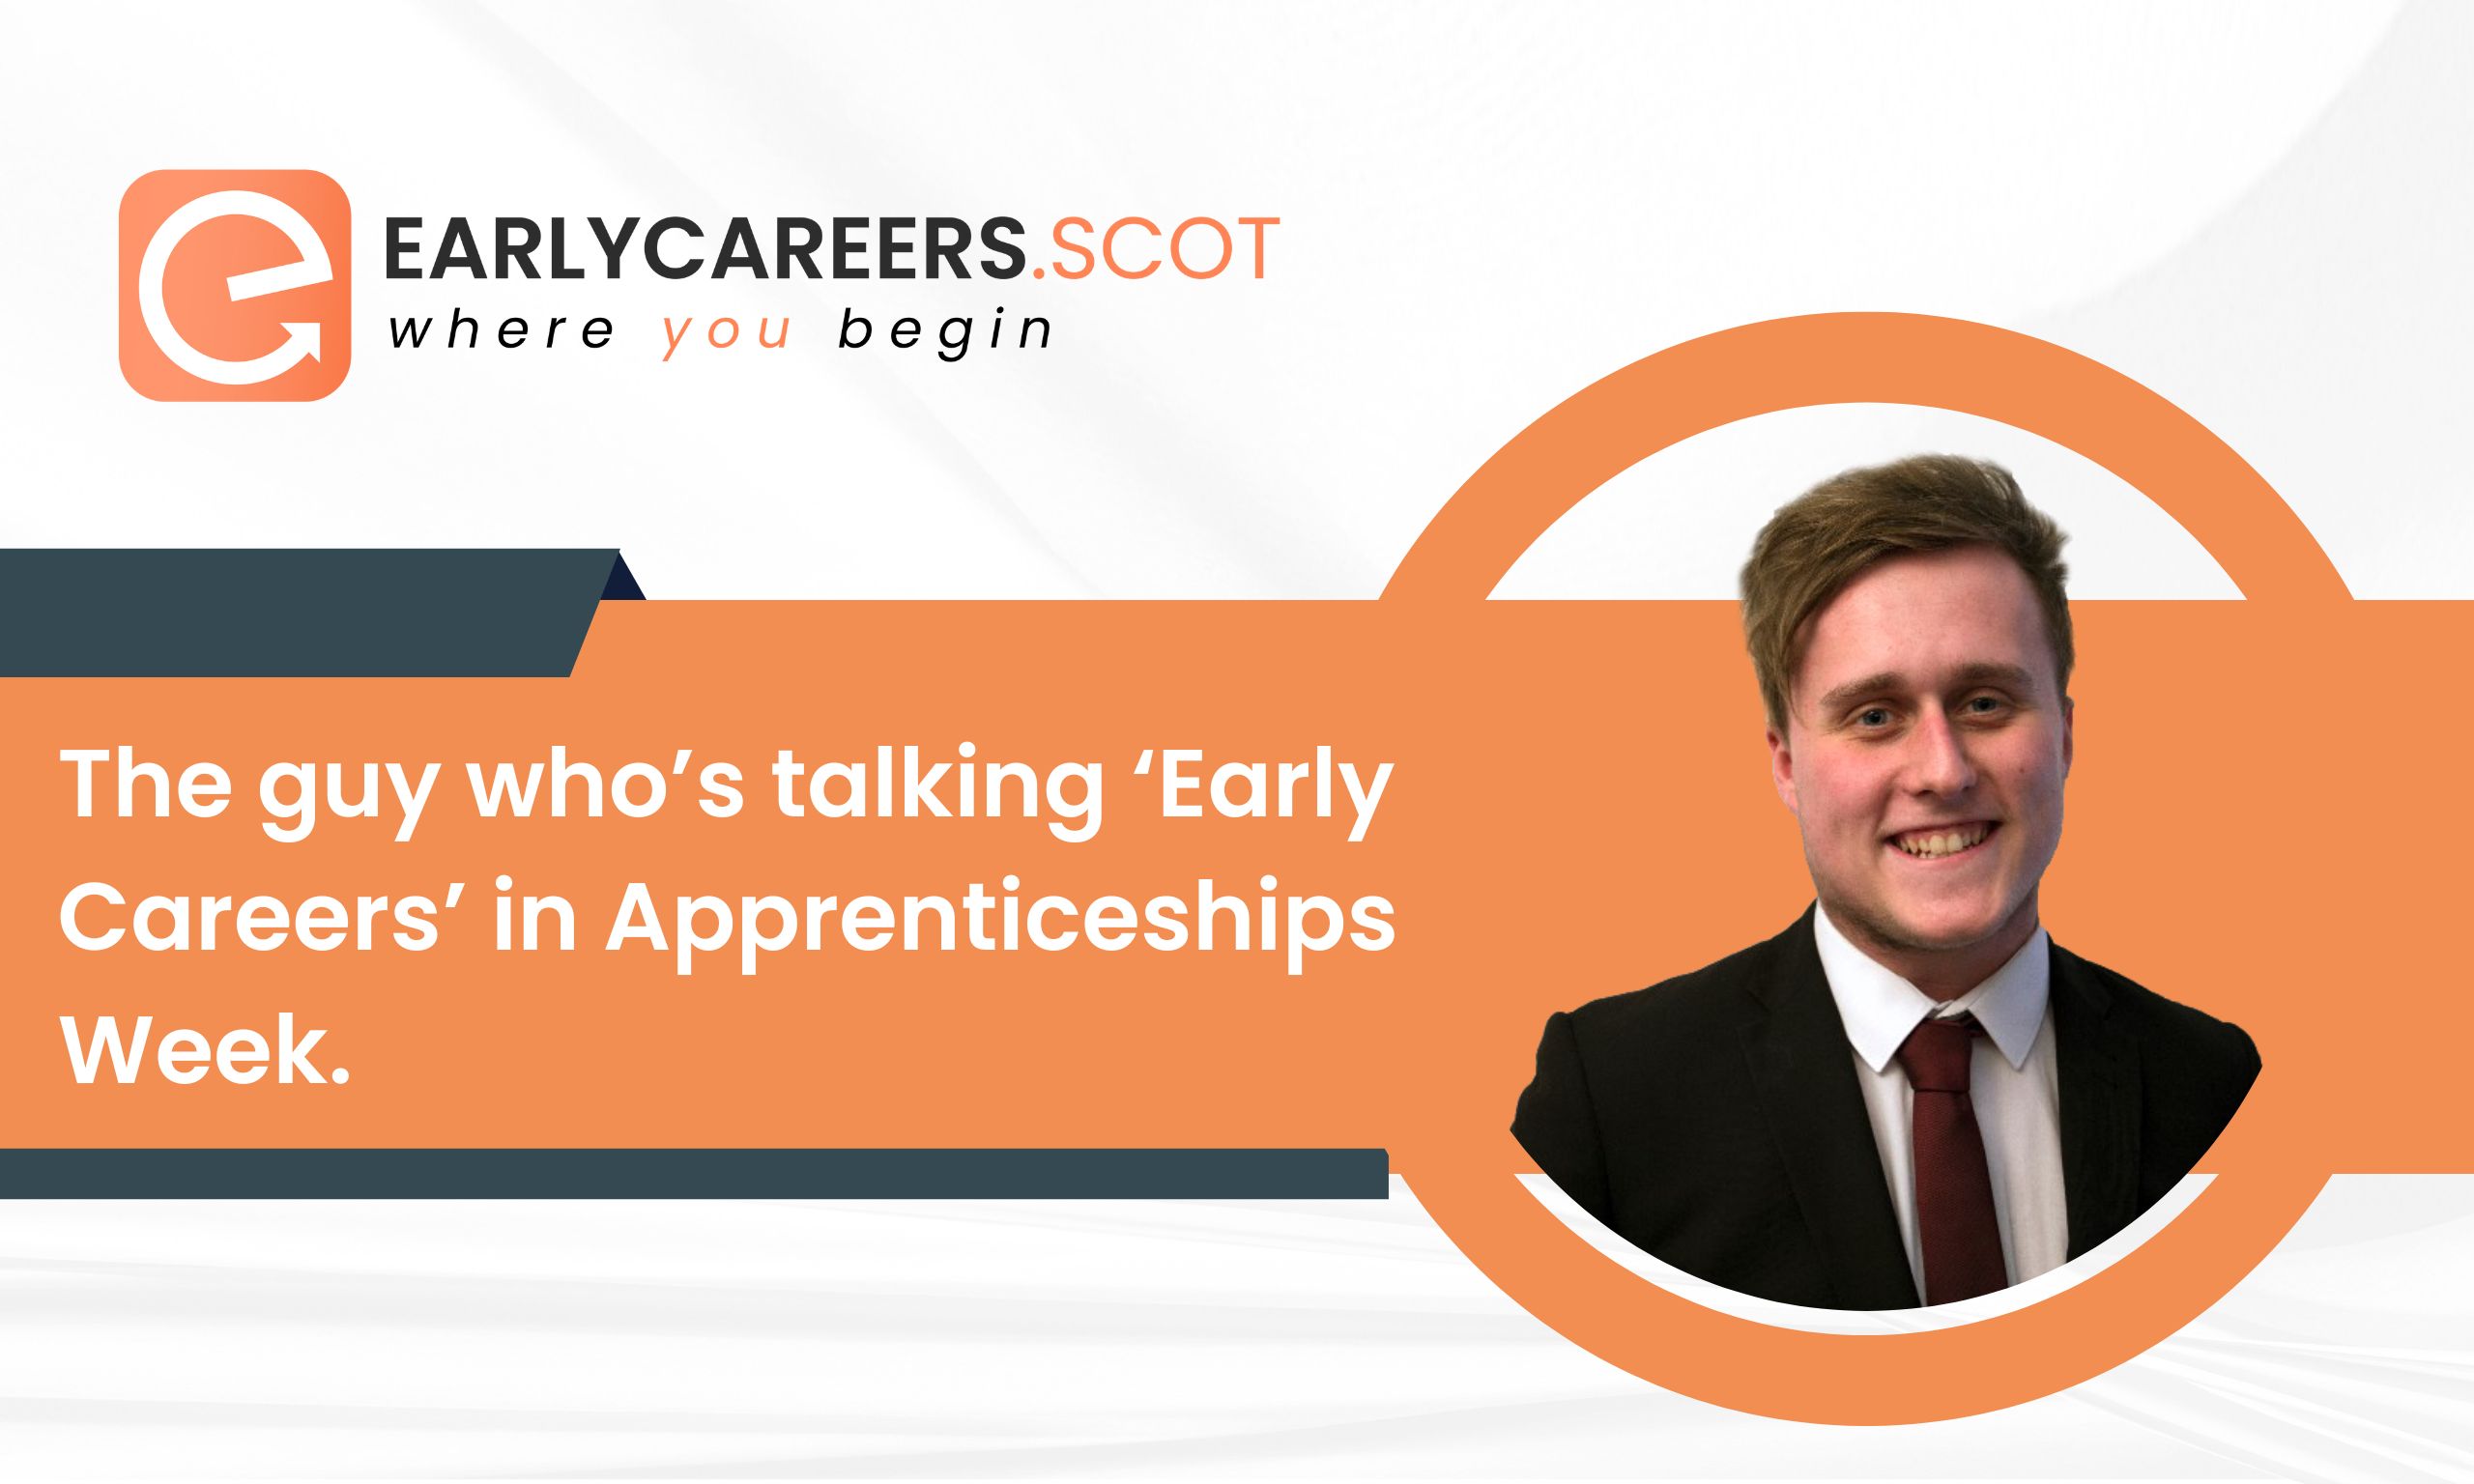 The guy who’s talking ‘Early Careers’ in Apprenticeships Week.